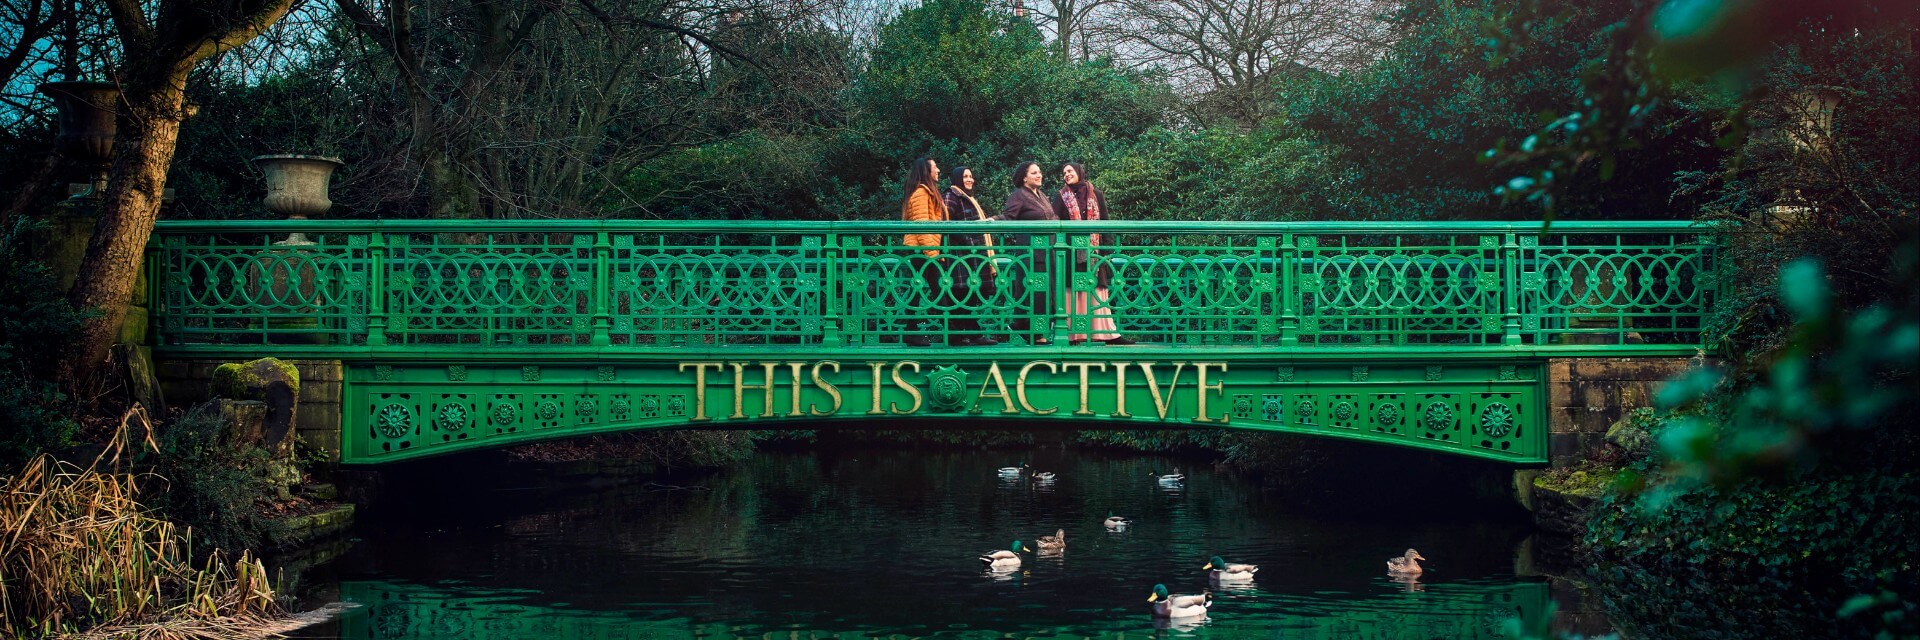 A South Asian Ladies walking group crossing a bridge in People's park. The bridge has the words "this is active" on it.